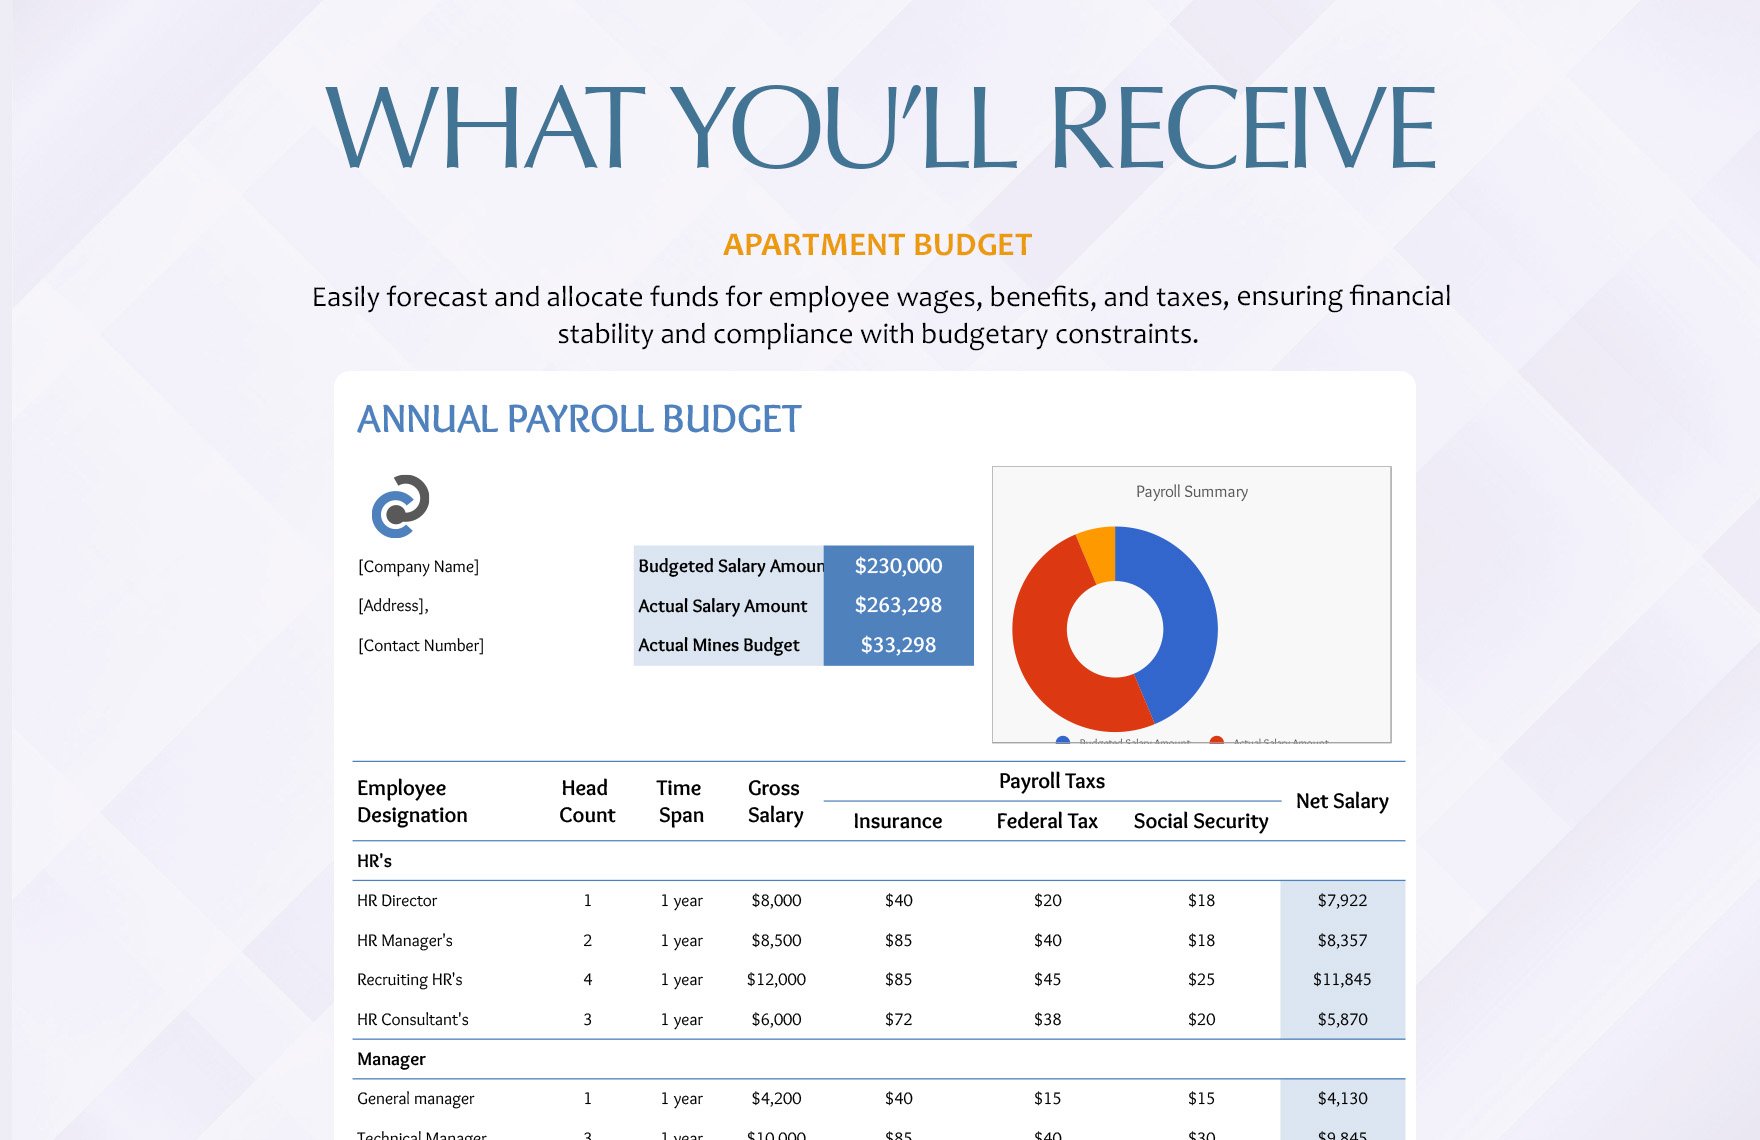 Annual Payroll Budget Template